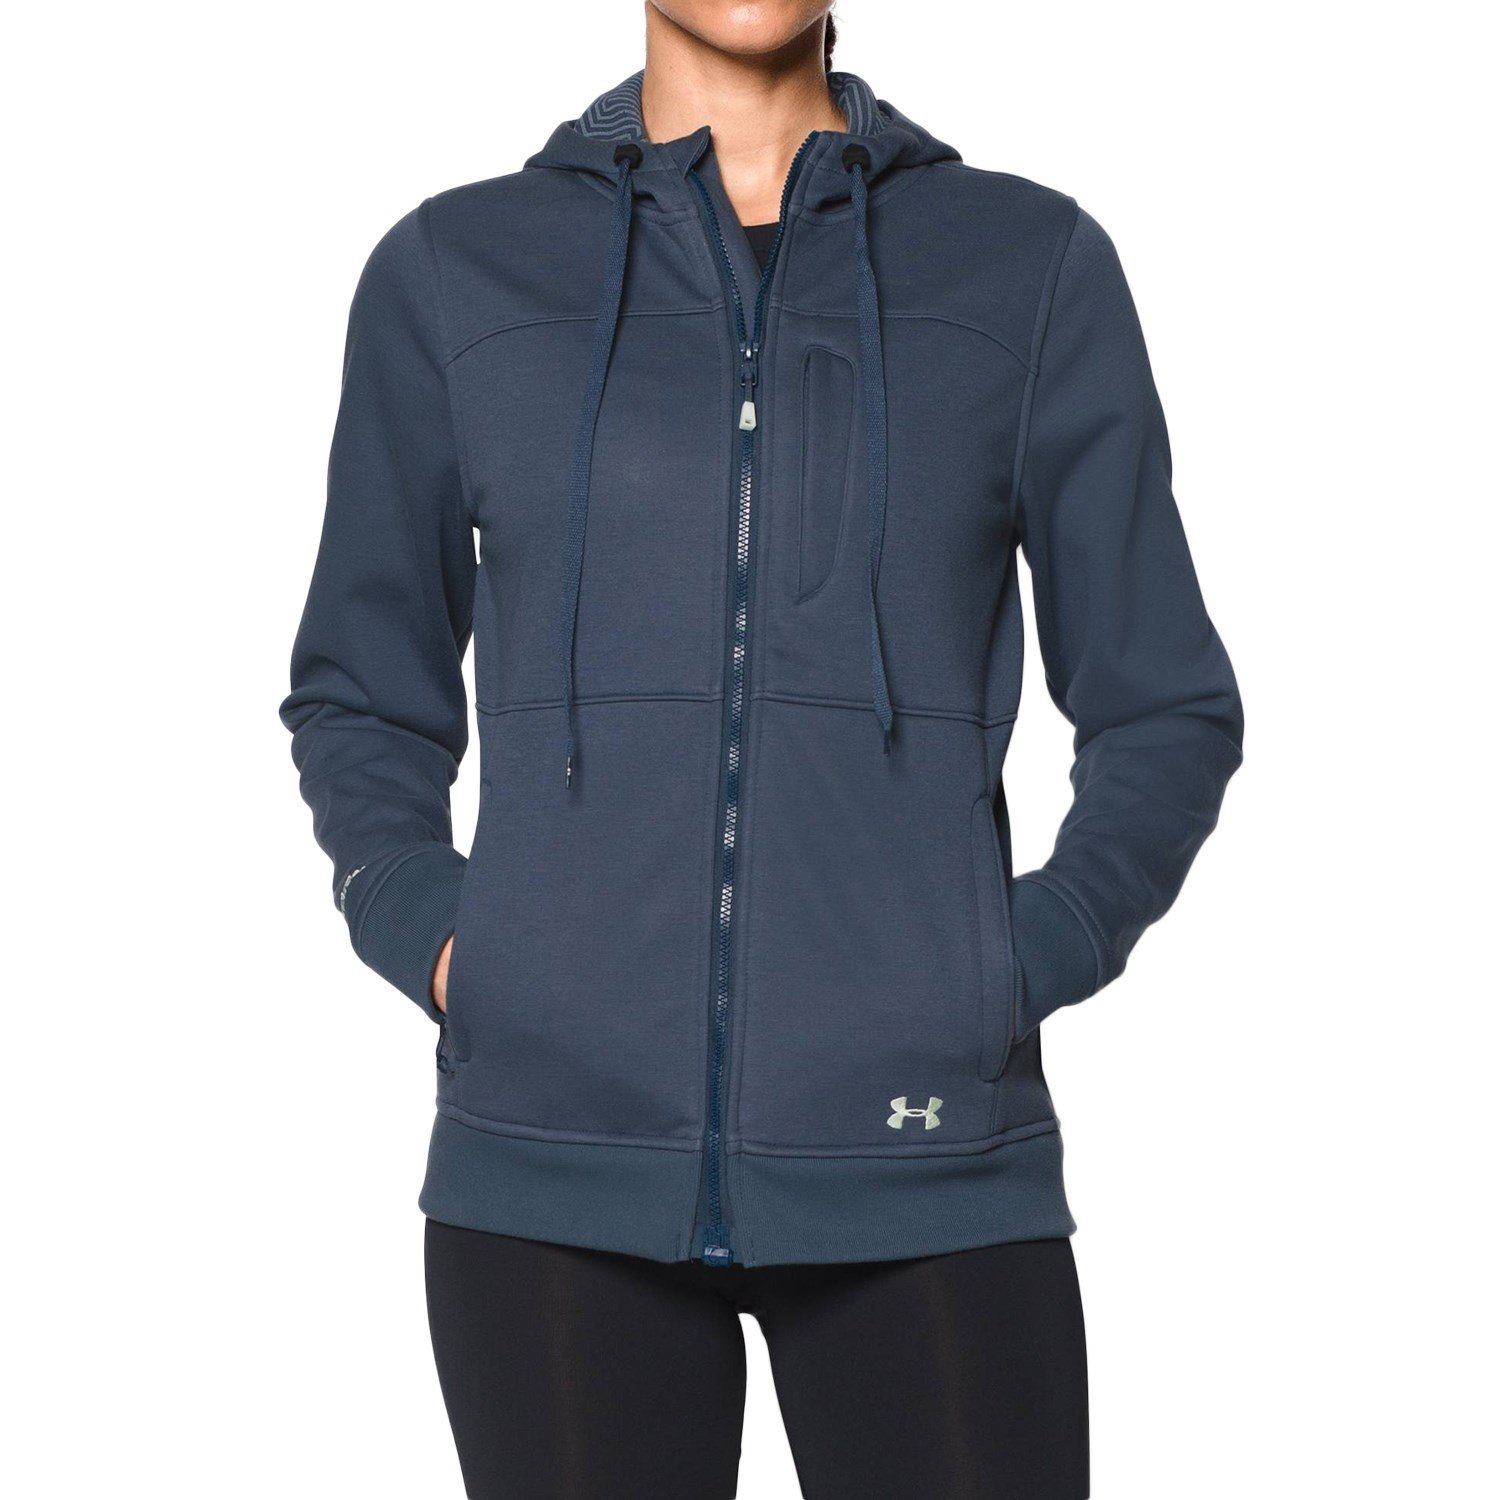 Under Armour womens Storm Coldgear Infrared Softershell Jacket